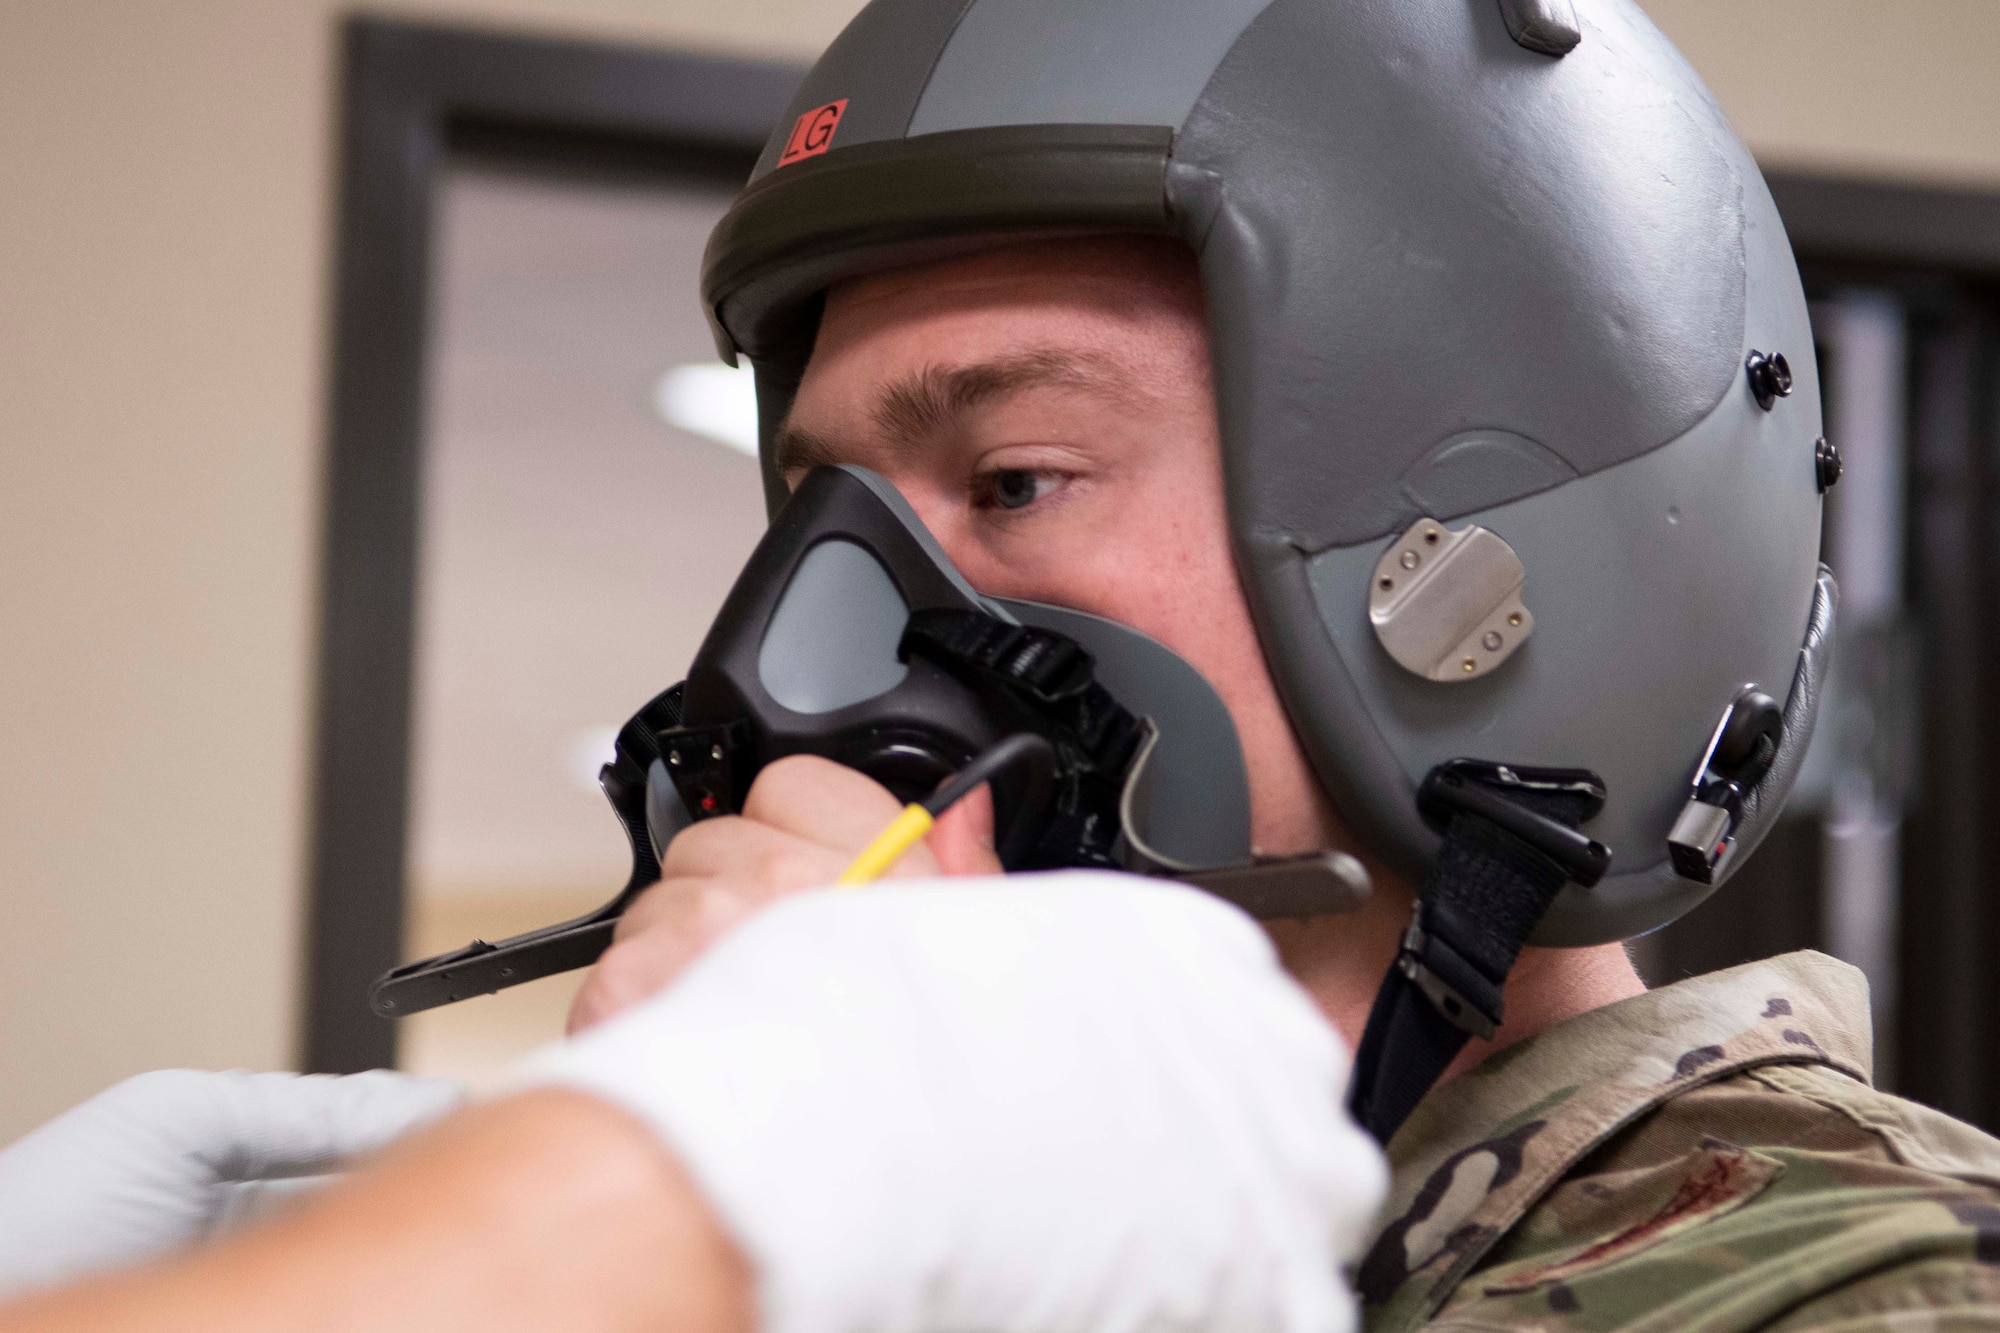 Photo of Airman being fit for helmet.